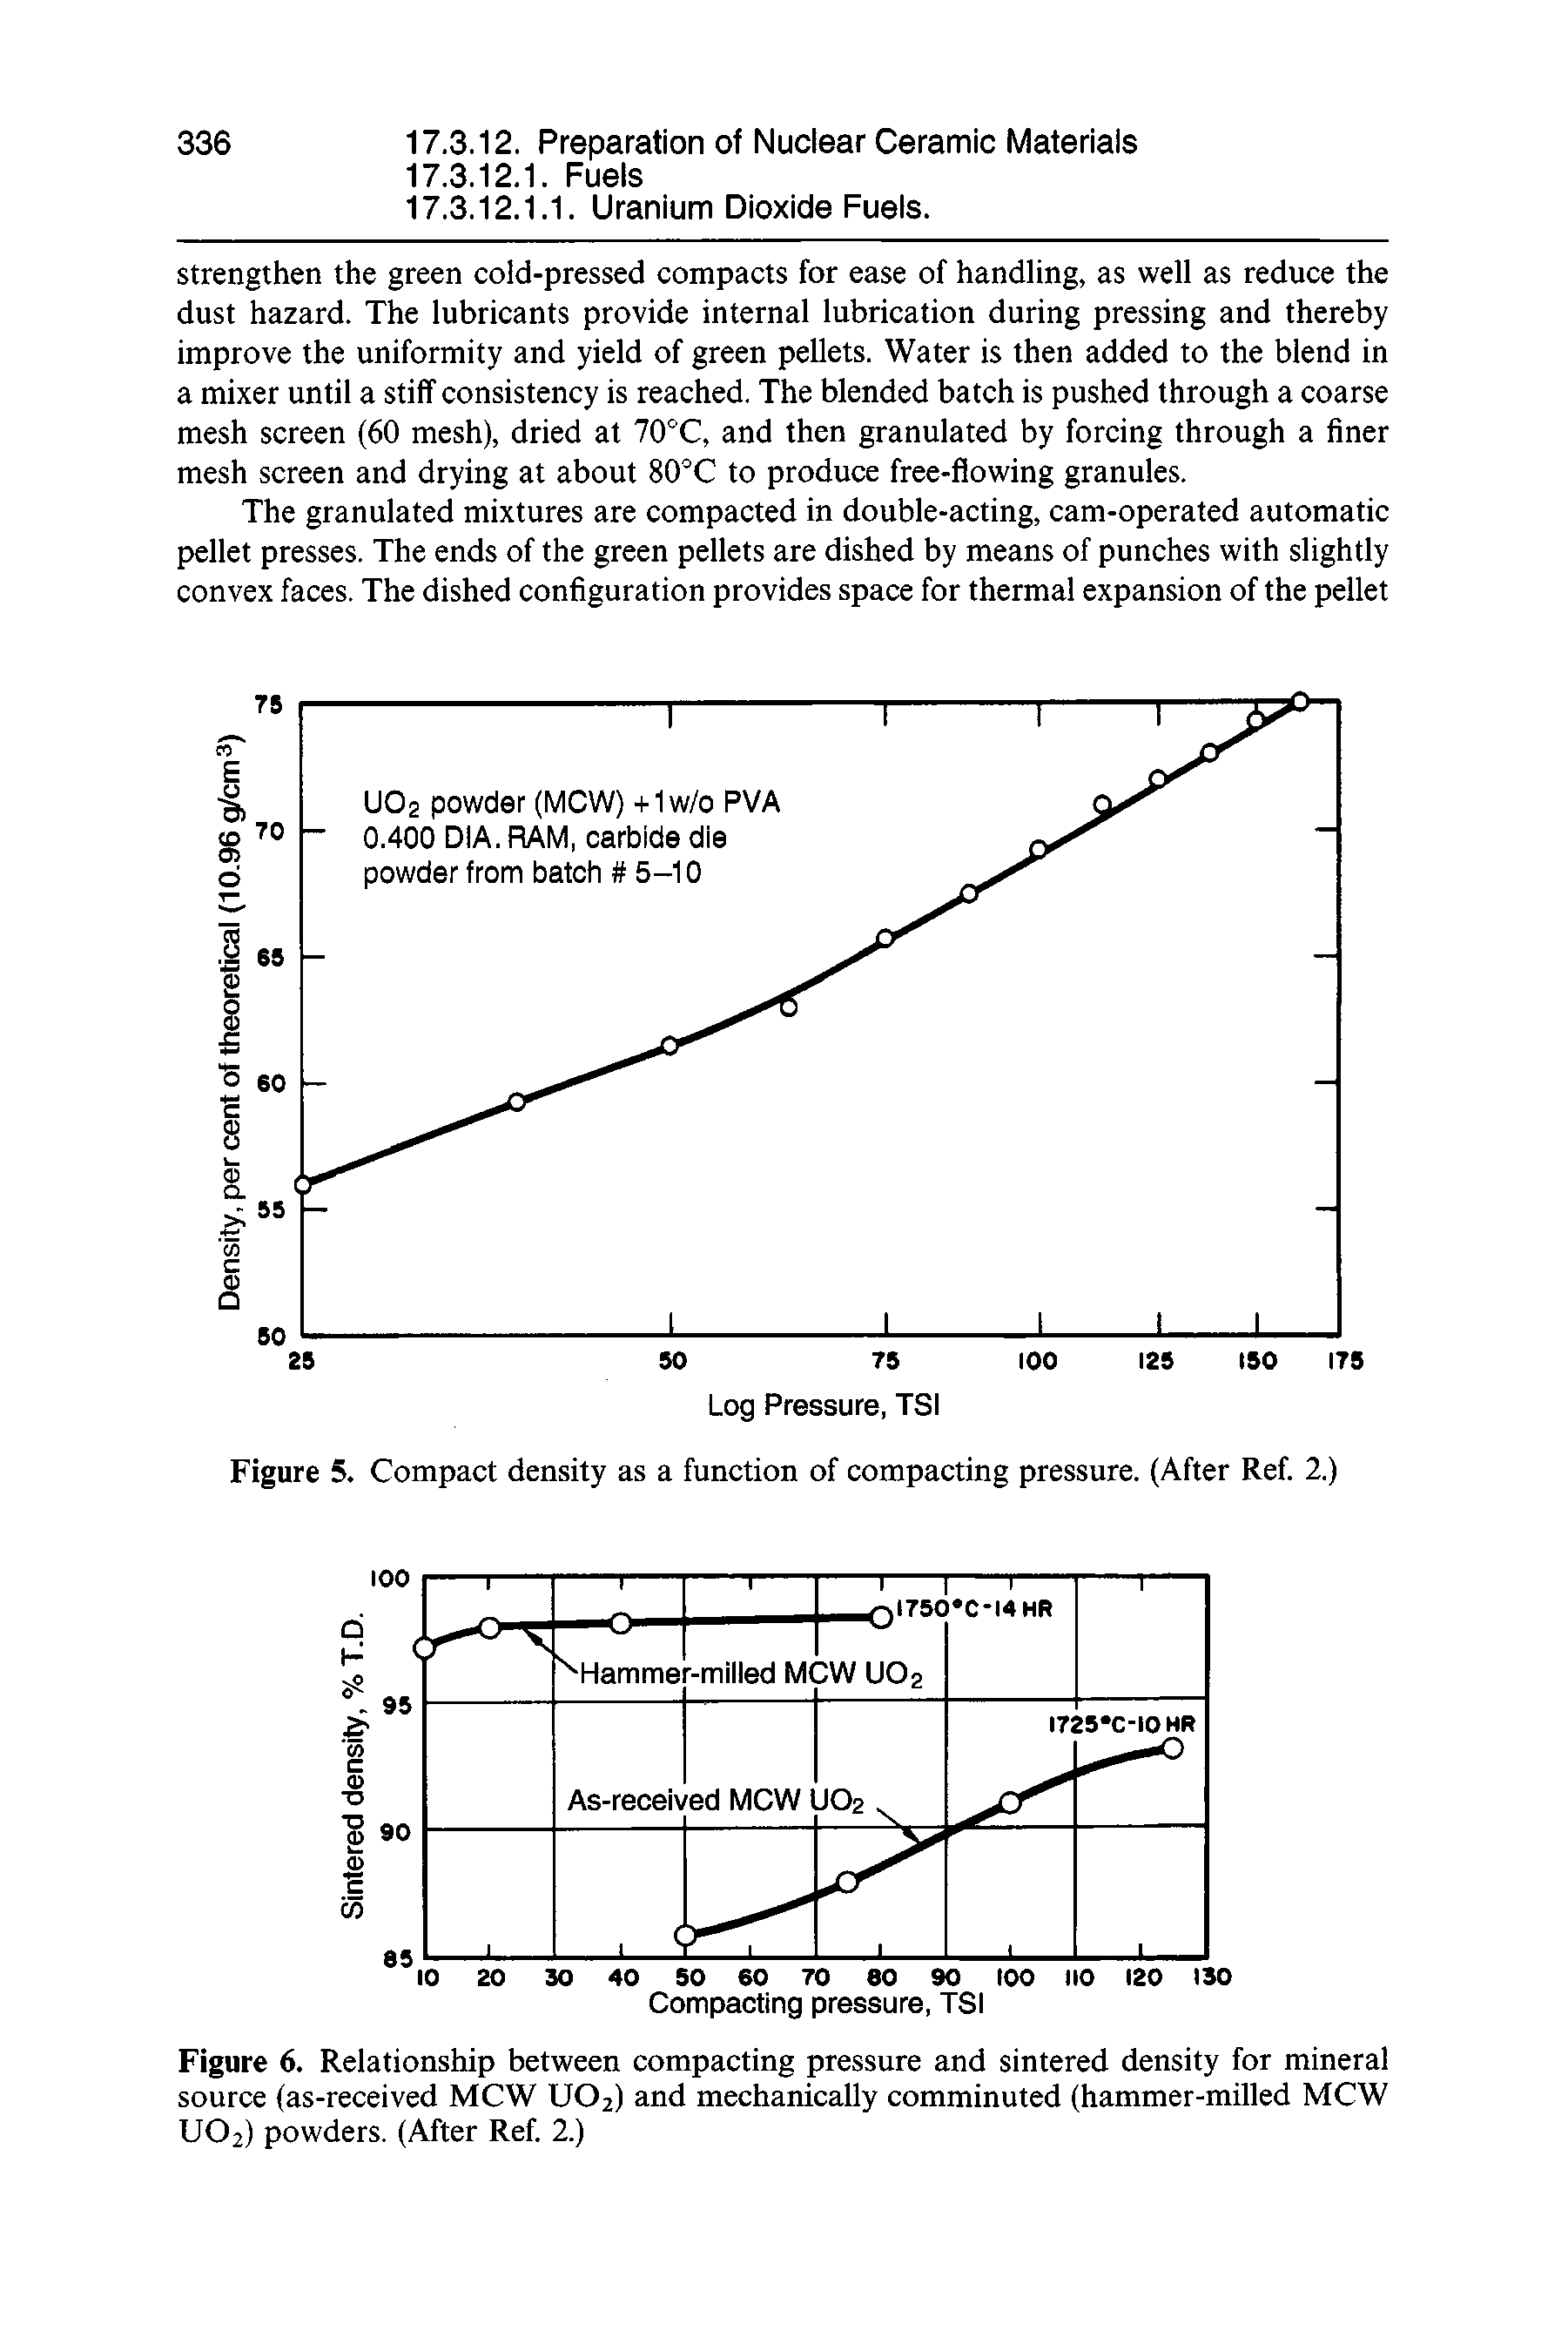 Figure 6. Relationship between compacting pressure and sintered density for mineral source (as-received MCW UO2) and mechanically comminuted (hammer-milled MCW UO2) powders. (After Ref. 2.)...